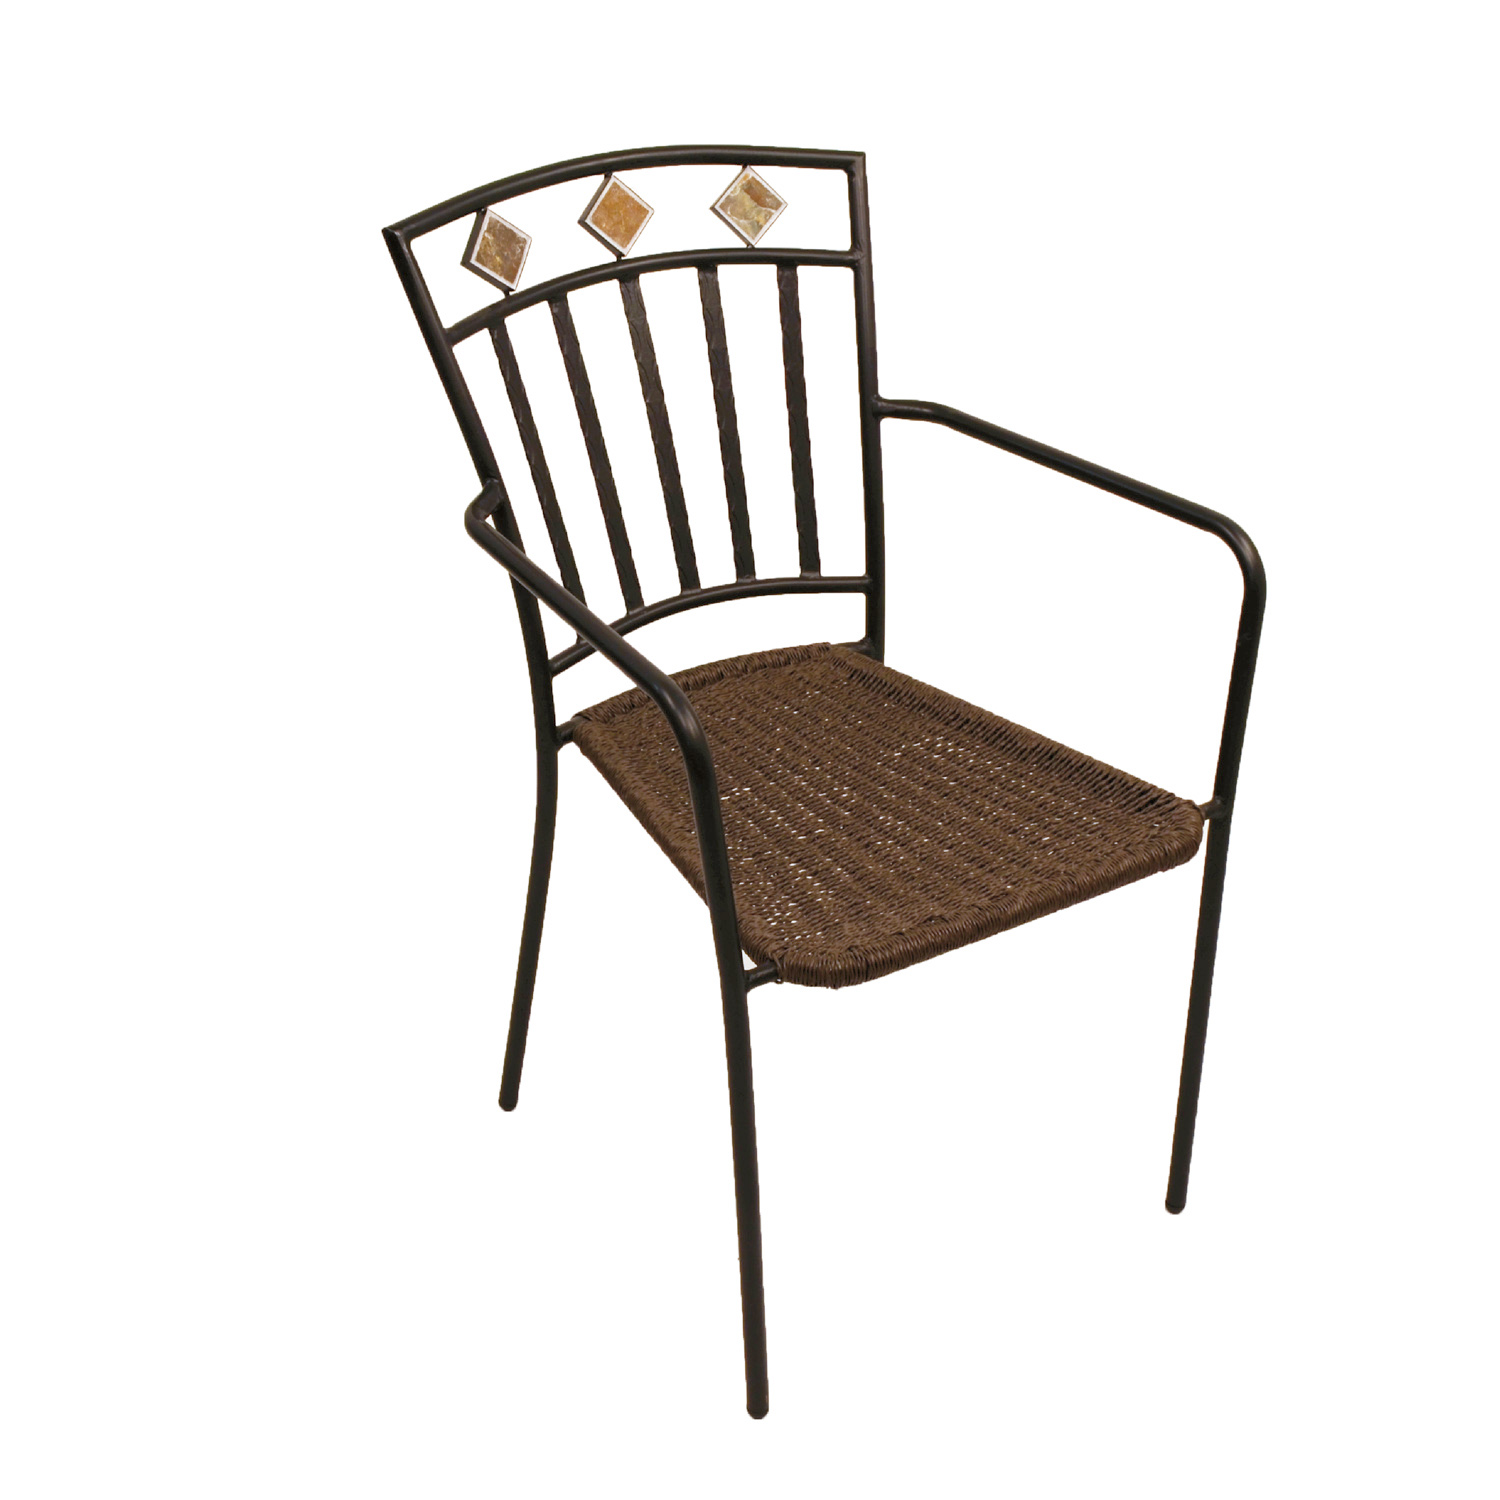 Europa Leisure Malaga Outdoor Chair (Pack of 2) Chairs Europa Leisure   